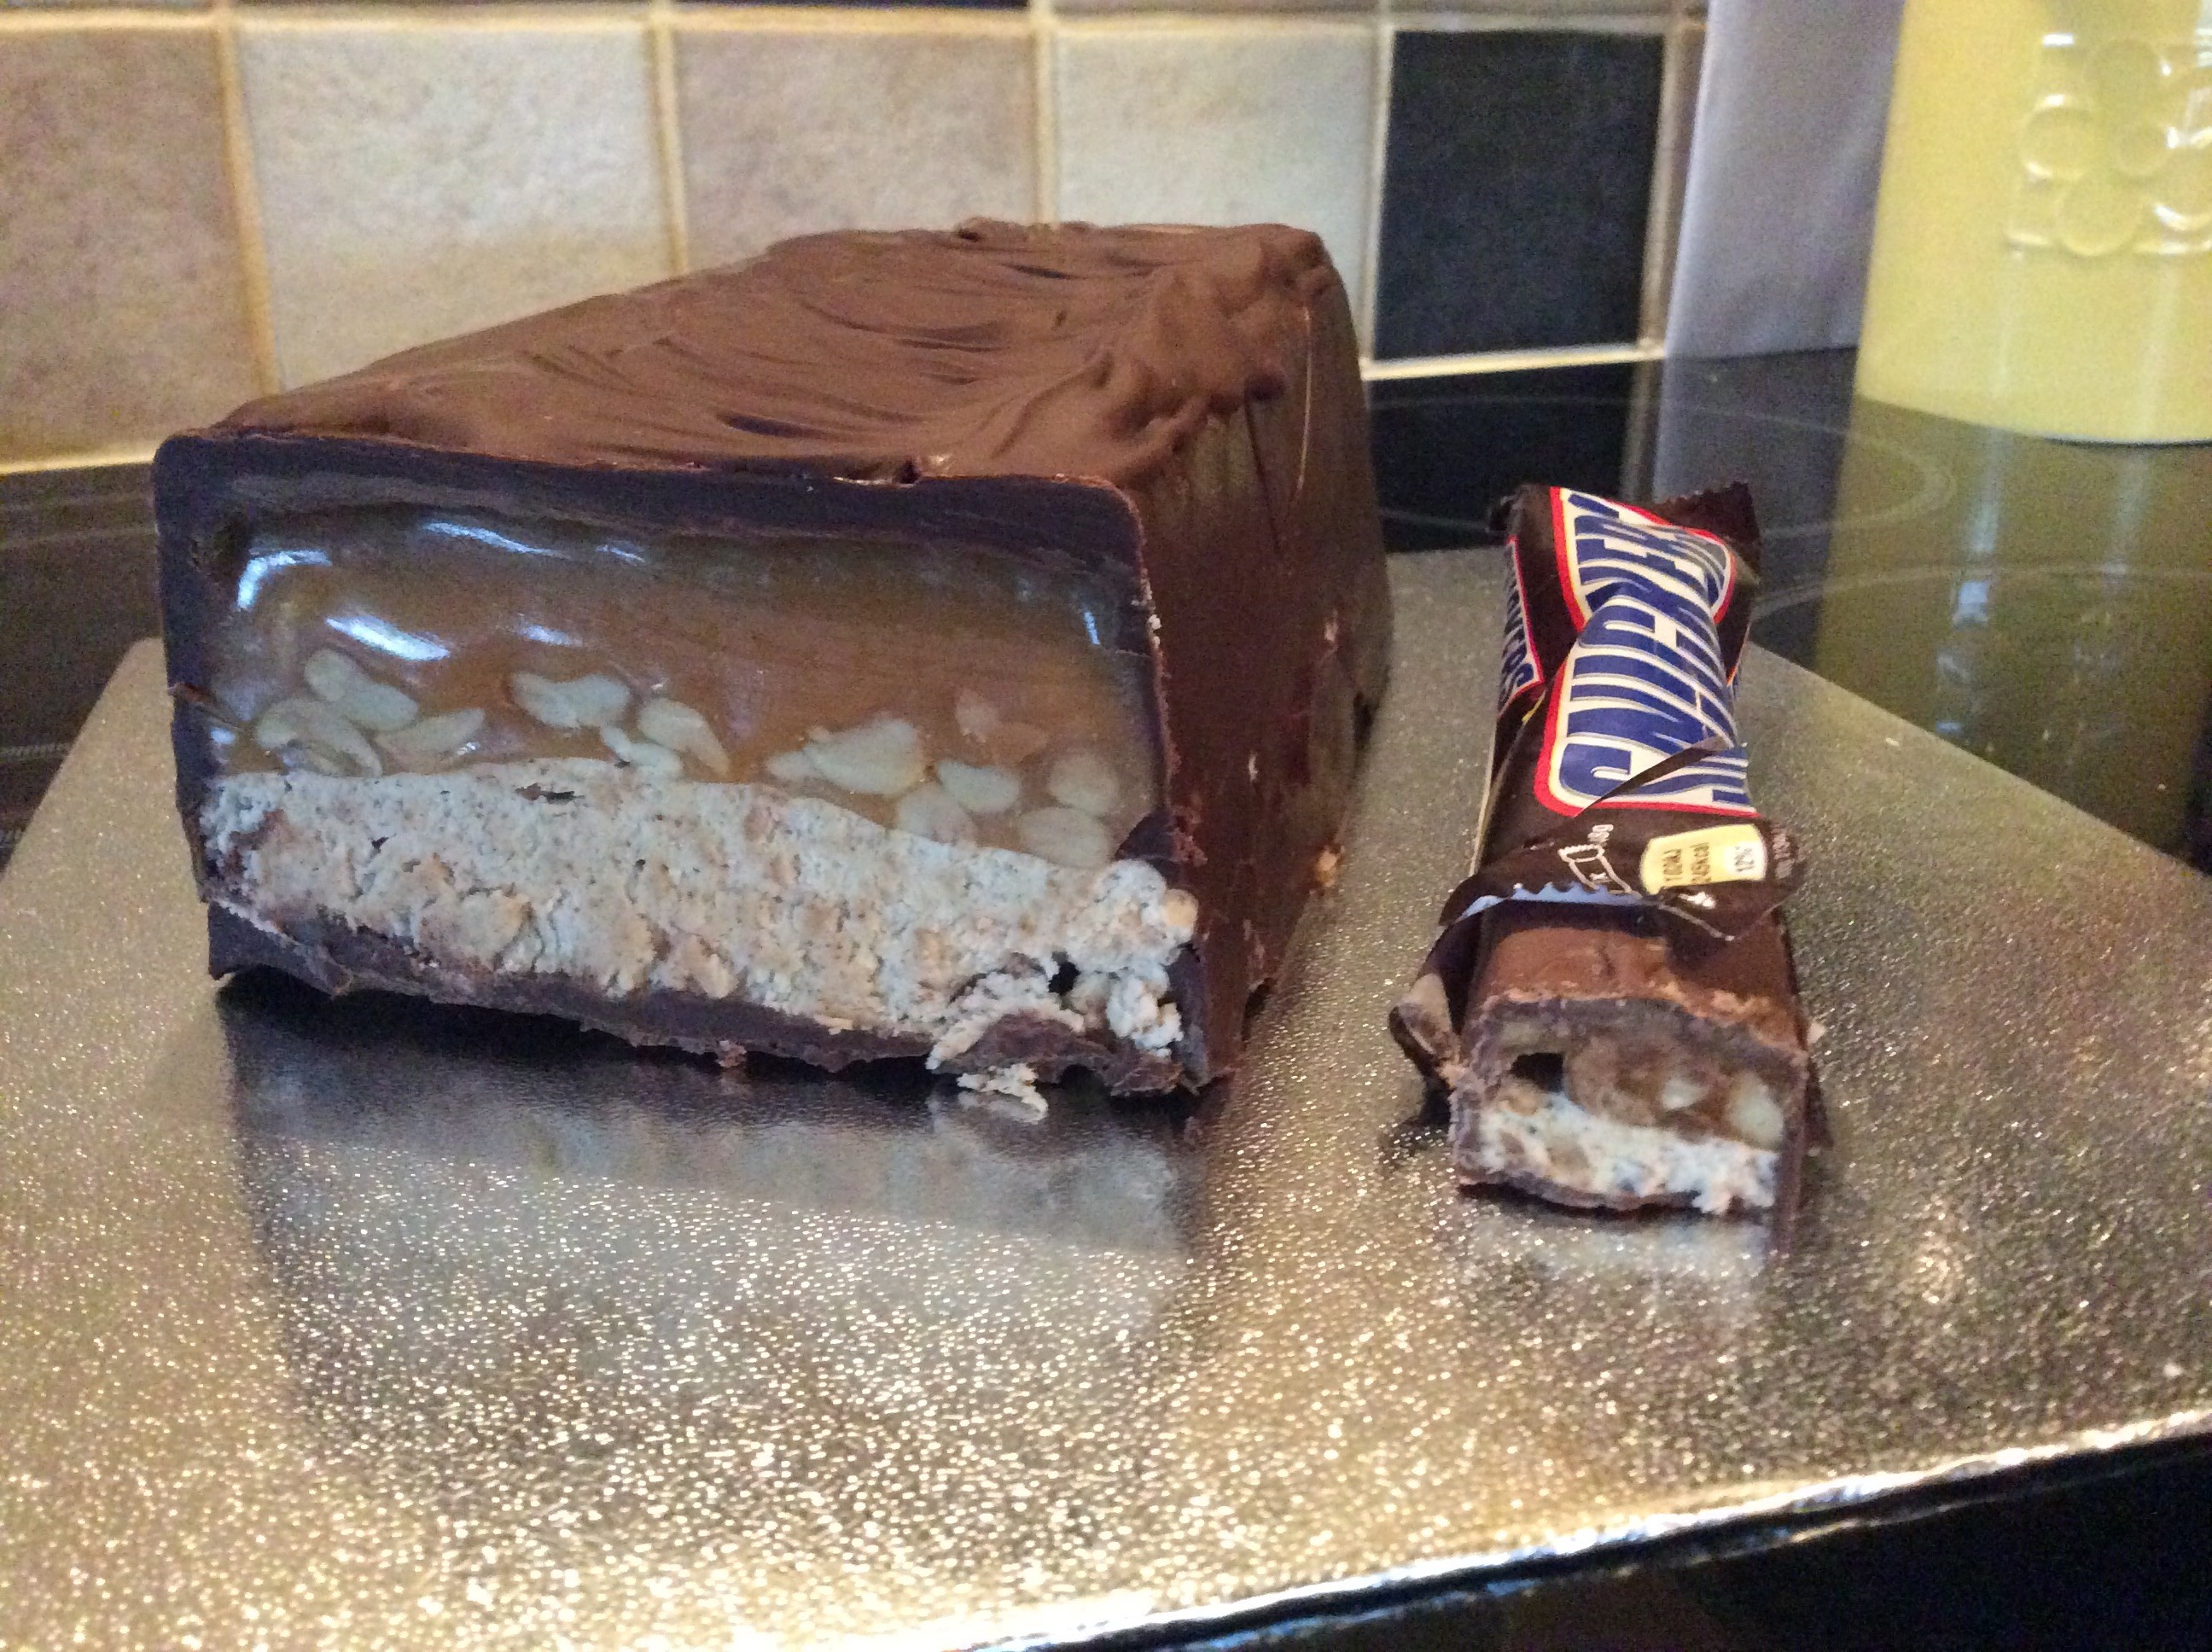 Giant snickers chocolate bar | The Great British Bake Off